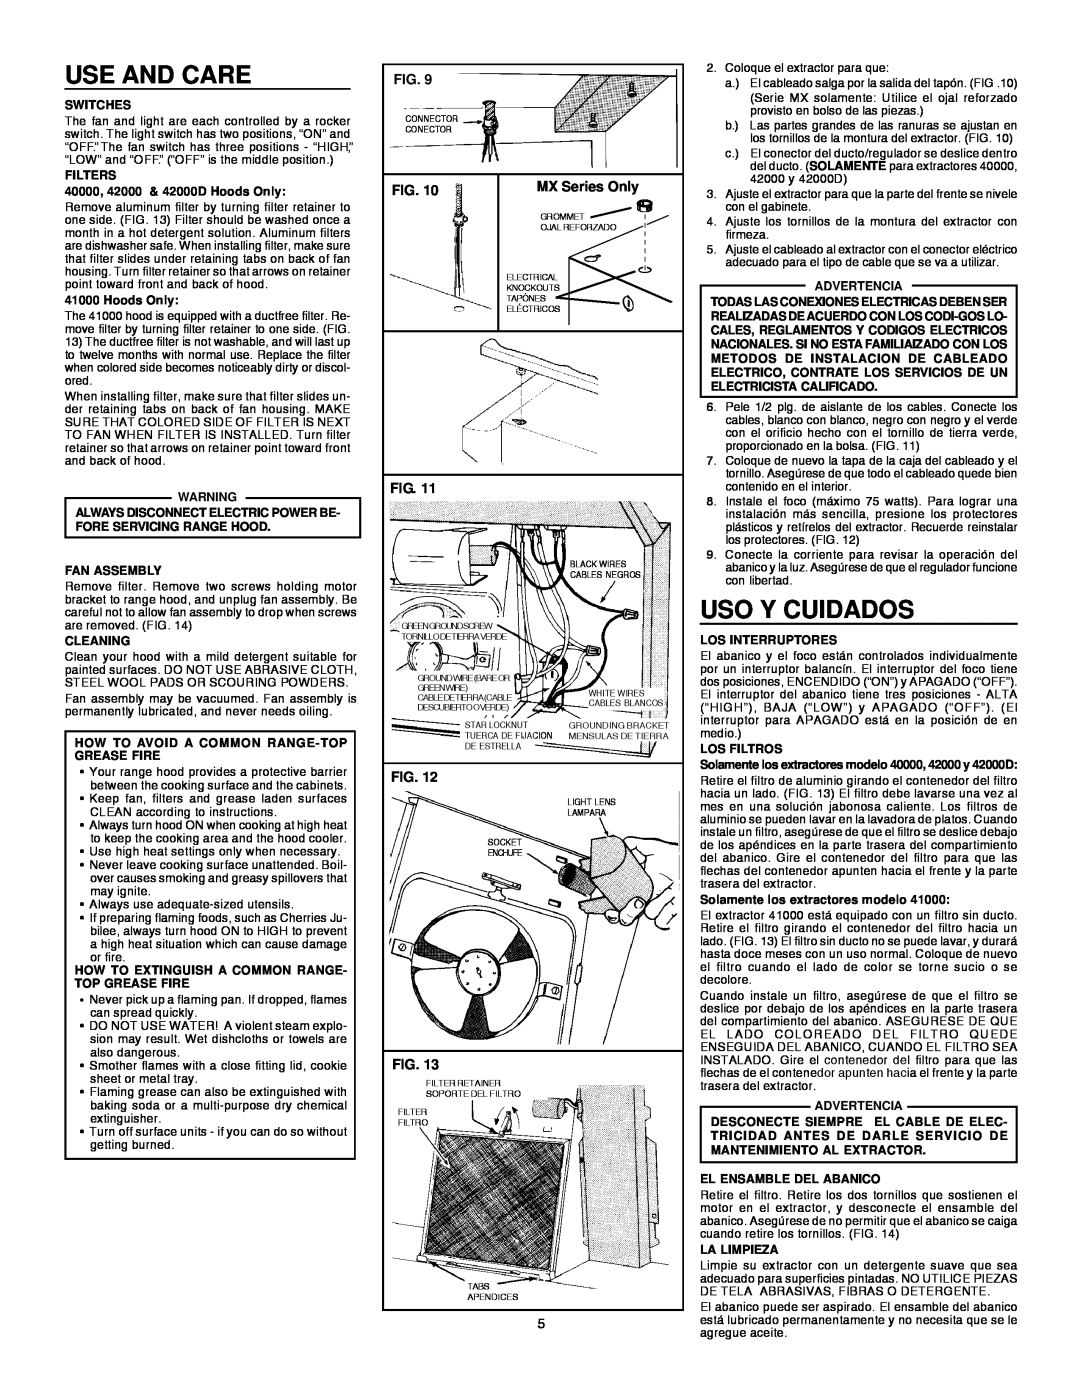 Broan 413001 installation instructions Use And Care, Uso Y Cuidados, MX Series Only 